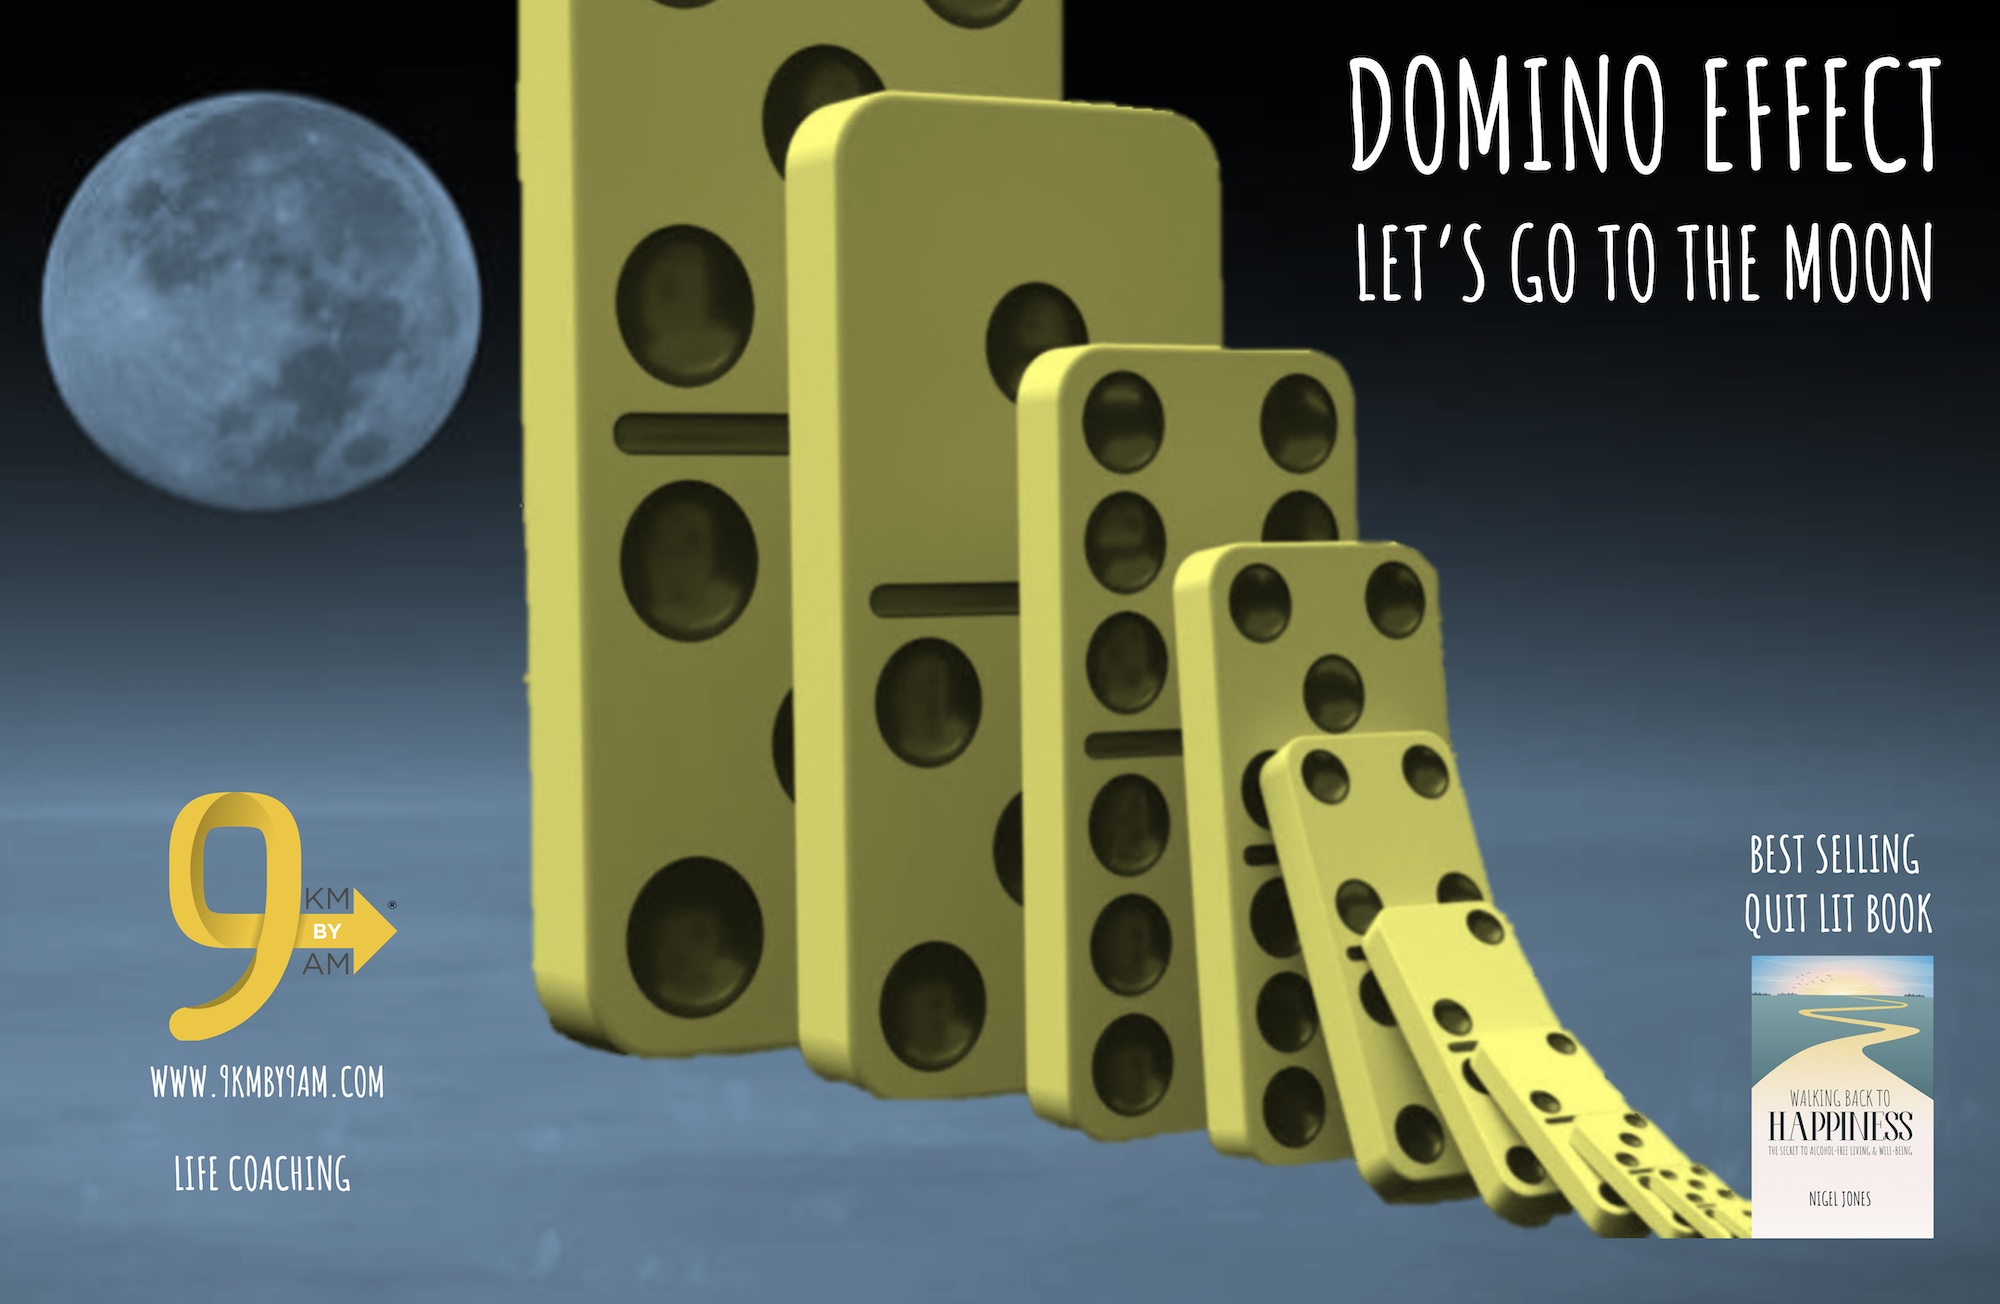 DOMINO EFFECT: LET’S GO TO THE MOON…